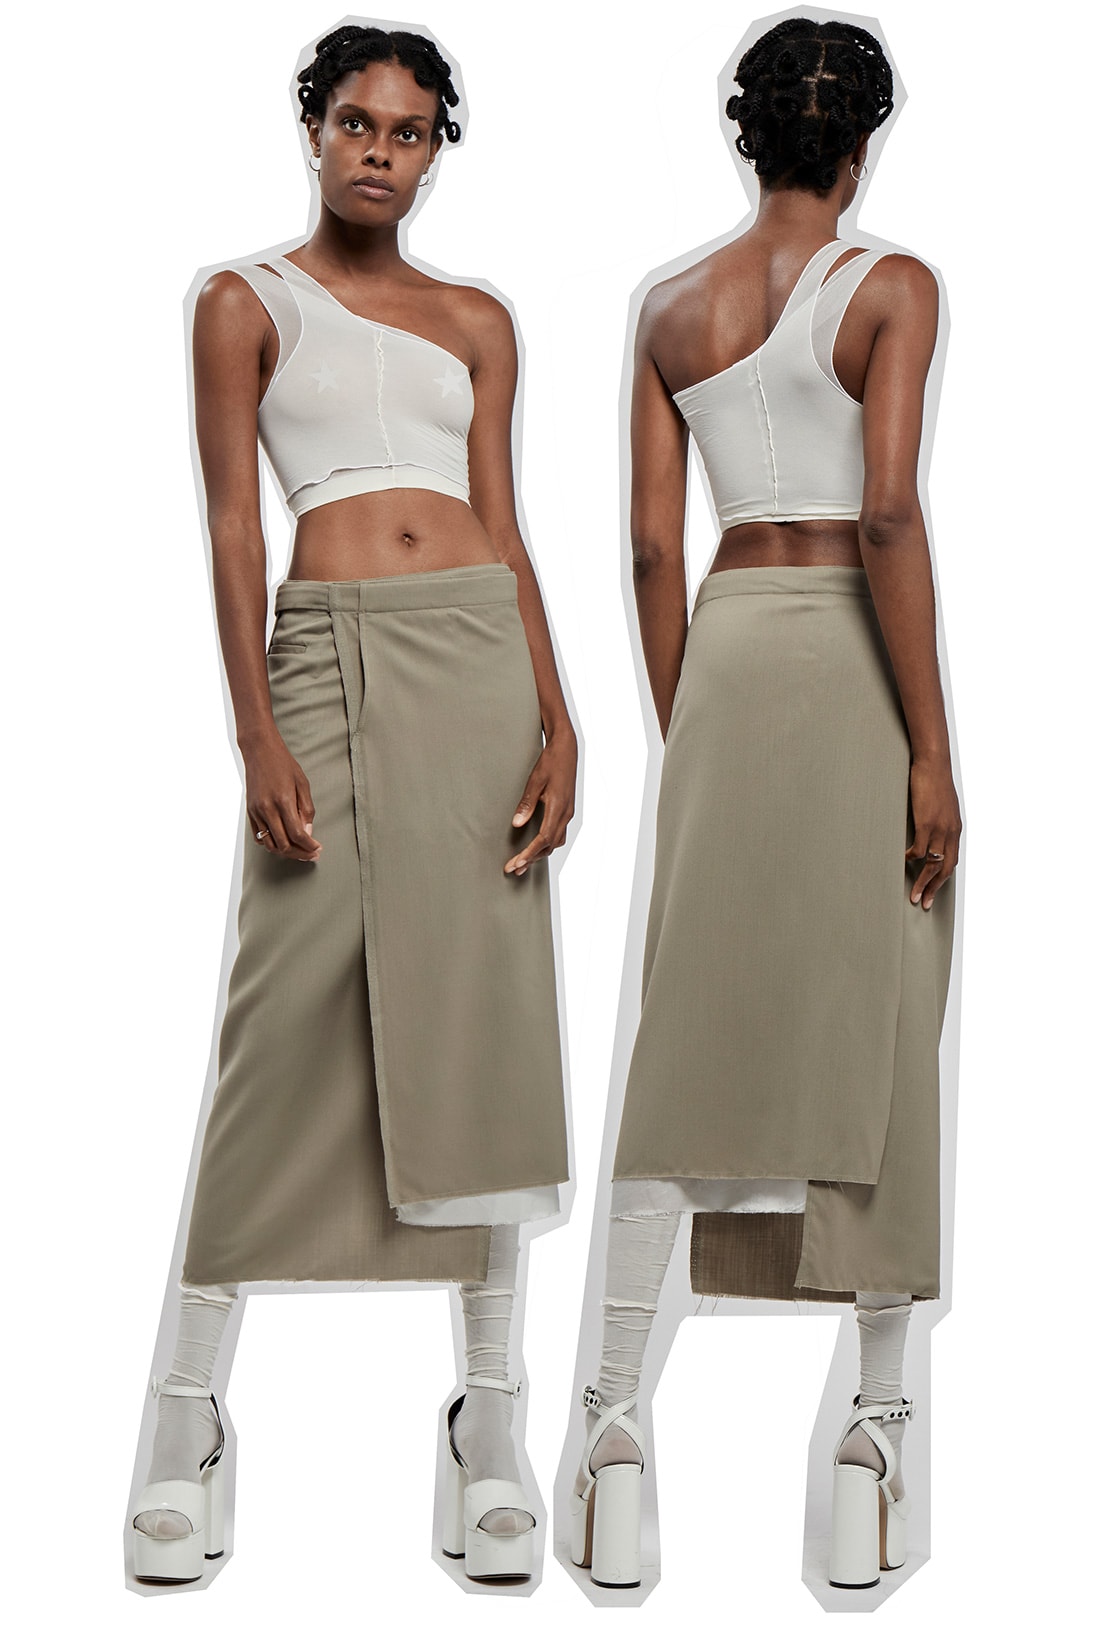 kits see through frill tank tops crops flared pants new york city nyc emerging designer brand collective